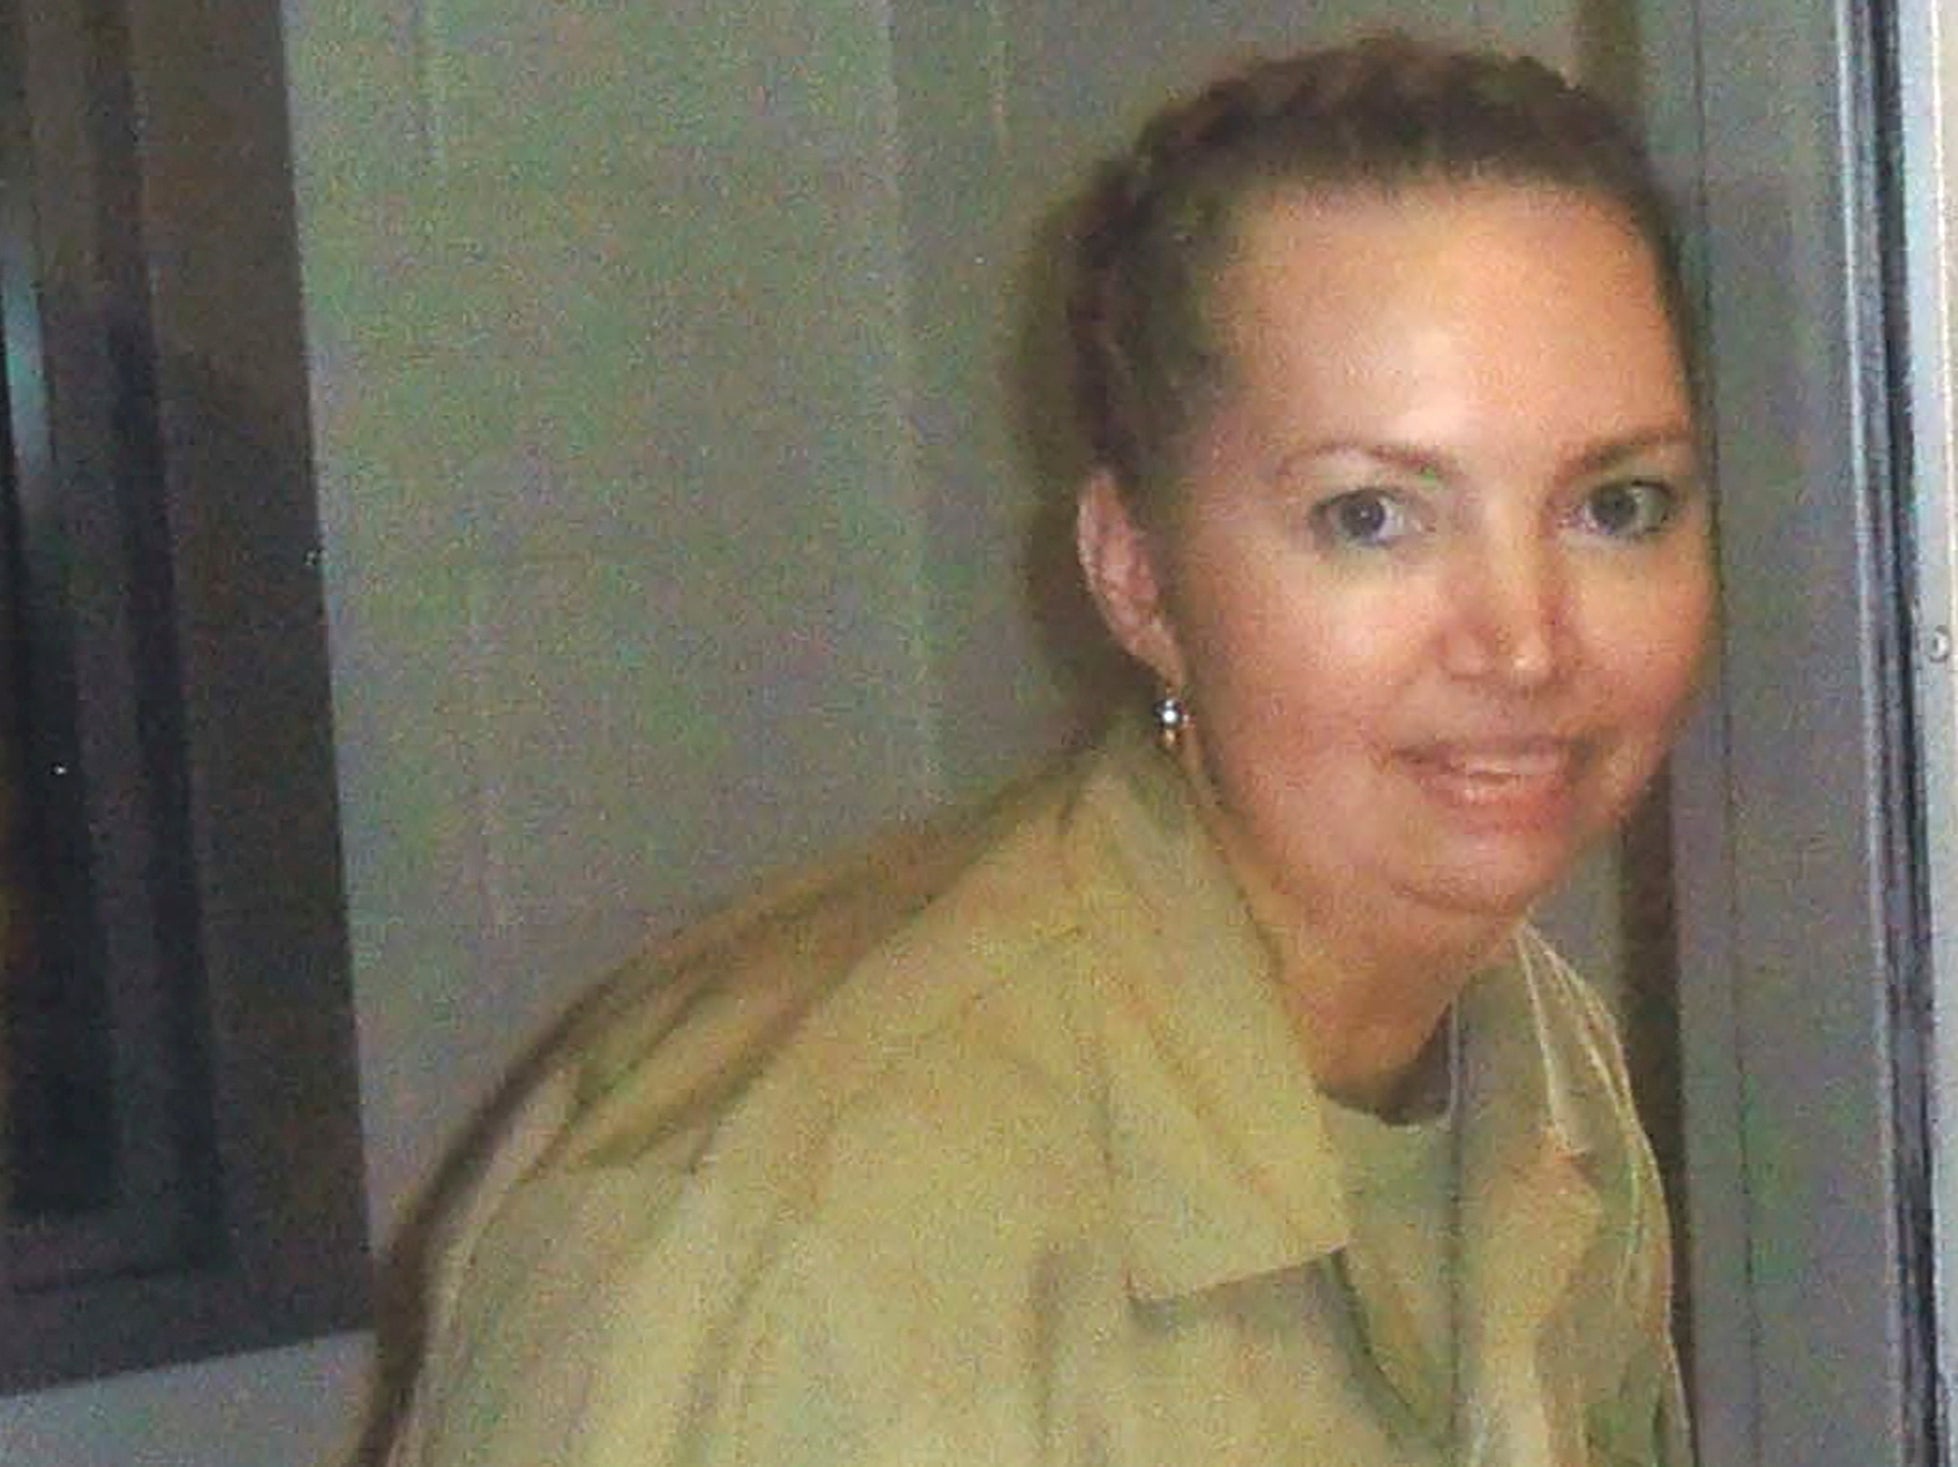 Lisa Montgomery, a federal prison inmate scheduled for execution on 8 December, 2020, poses at the Federal Medical Center, Fort Worth, in an undated photograph